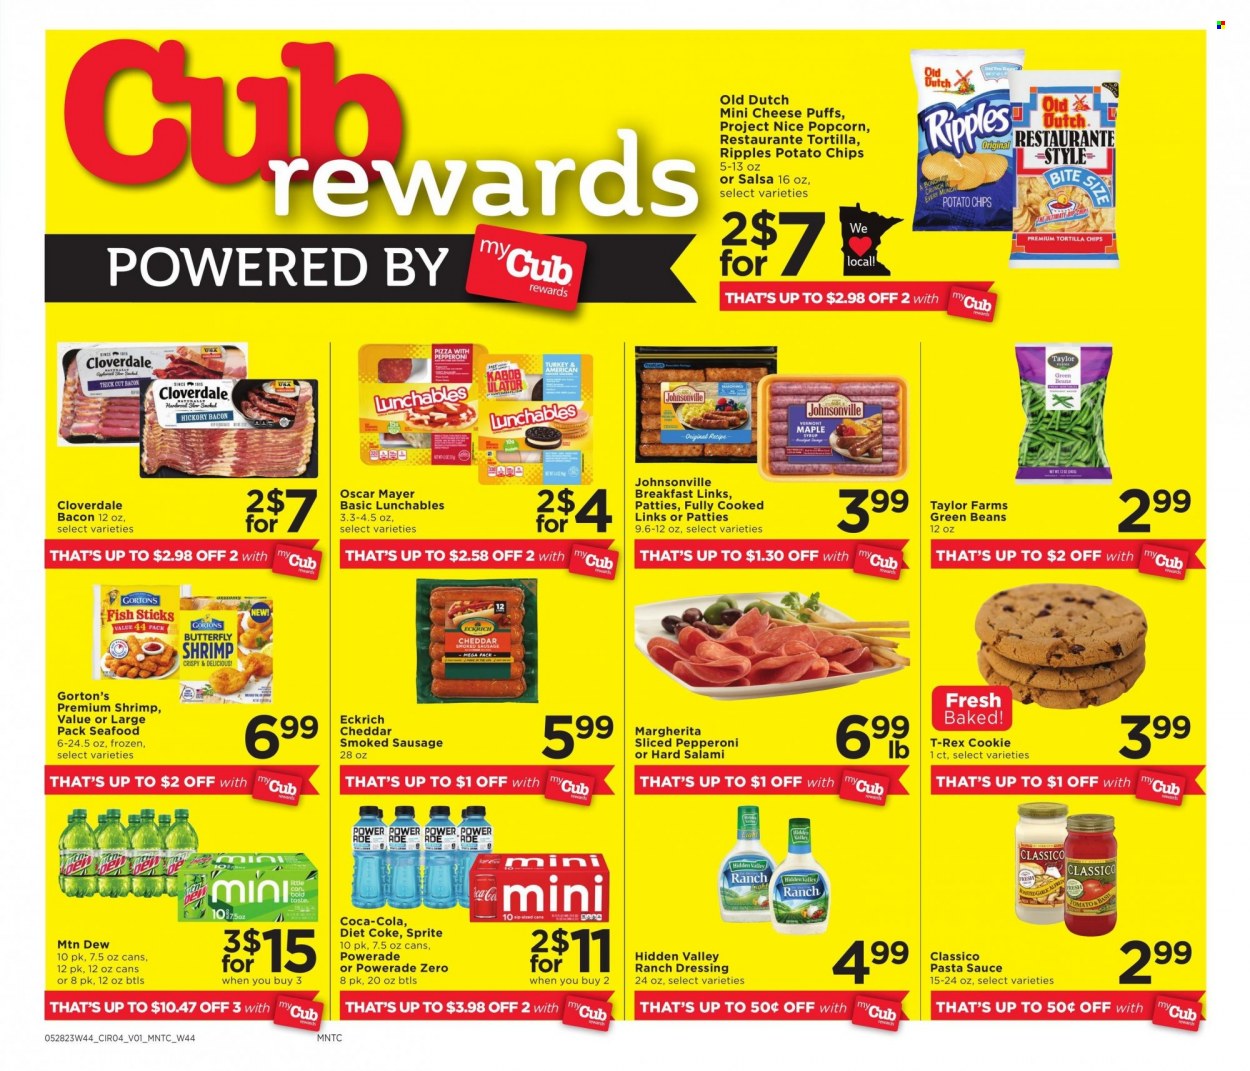 thumbnail - Cub Foods Flyer - 05/28/2023 - 06/03/2023 - Sales products - puffs, beans, garlic, green beans, seafood, fish, shrimps, fish fingers, Gorton's, fish sticks, pizza, pasta sauce, sauce, Lunchables, salami, hickory bacon, Johnsonville, Oscar Mayer, sausage, smoked sausage, ranch dressing, tortilla chips, potato chips, popcorn, dressing, salsa, Classico, maple syrup, syrup, Coca-Cola, Mountain Dew, Sprite, Powerade, energy drink, Diet Coke, soft drink, Coke, turkey. Page 10.